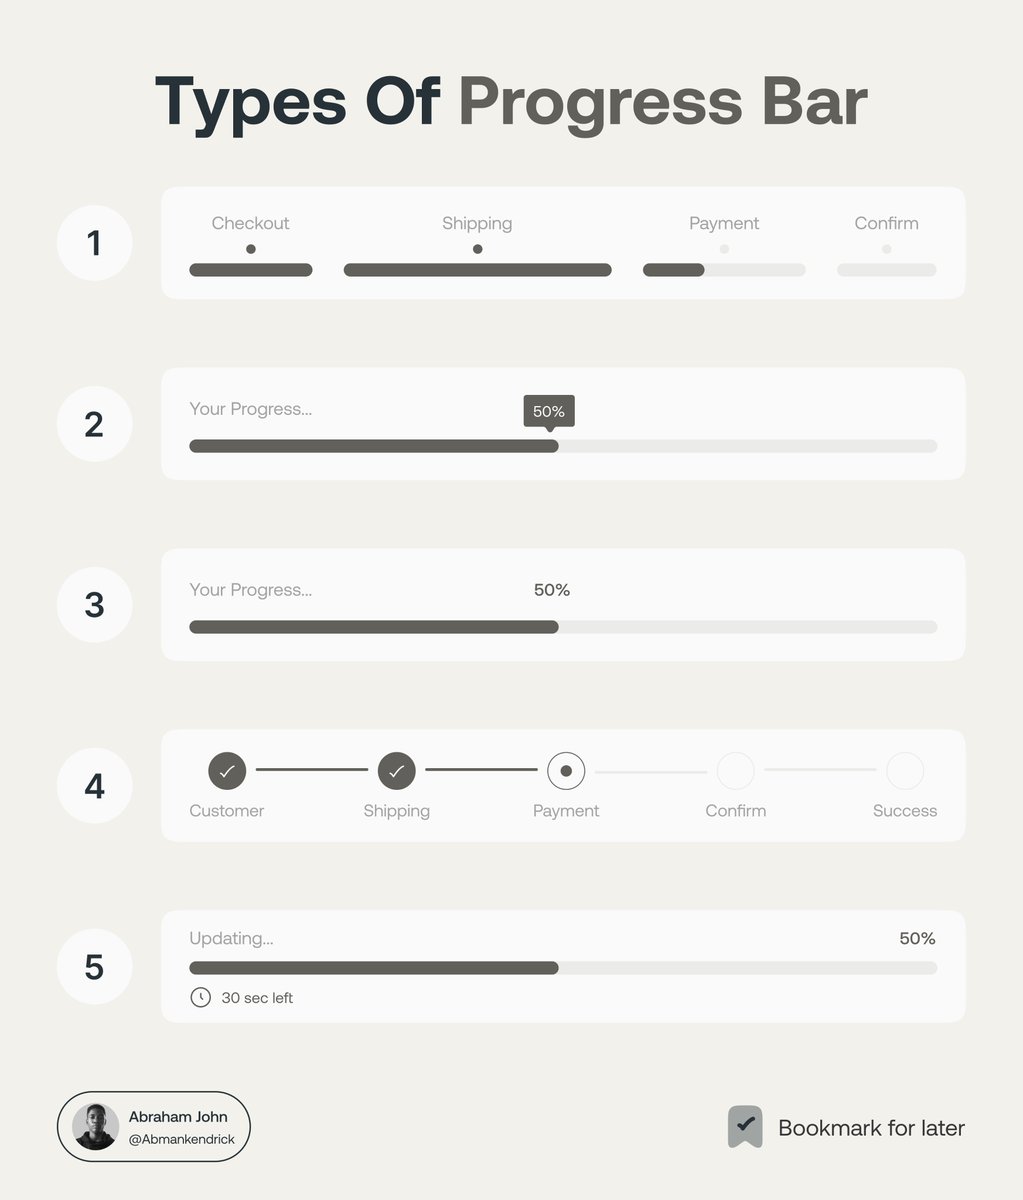 UI/UX Designer, here are type of progress bar and how they are useful in your day-to-day UI design.

→ Loading processes
→ File uploads/downloads
→ Form submissions
→ Installation processes
→ Multi-step tasks
→ Video/audio playback tracking
→ Download status in…